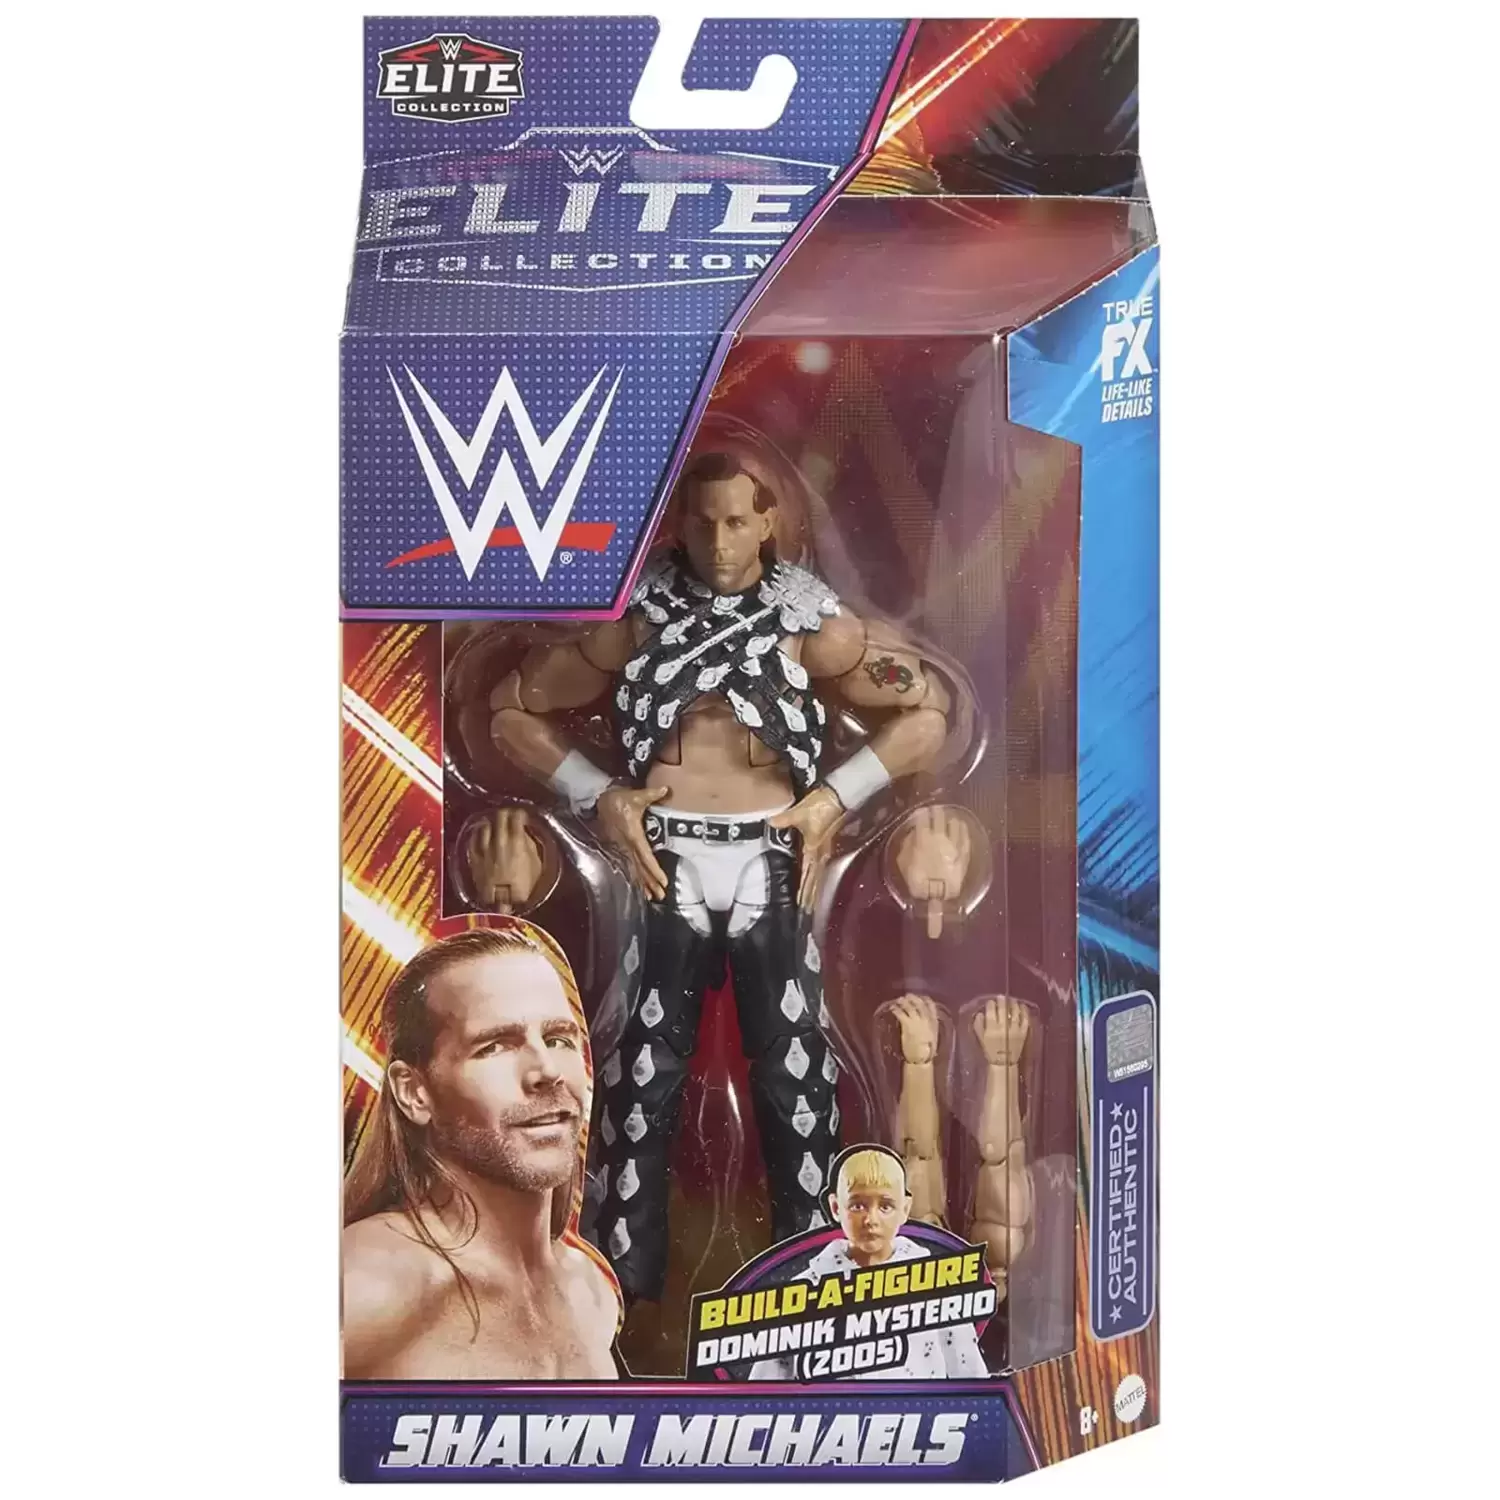 WWE Elite Collection - Shawn Michaels - Summerslam 2022 Elite Collection